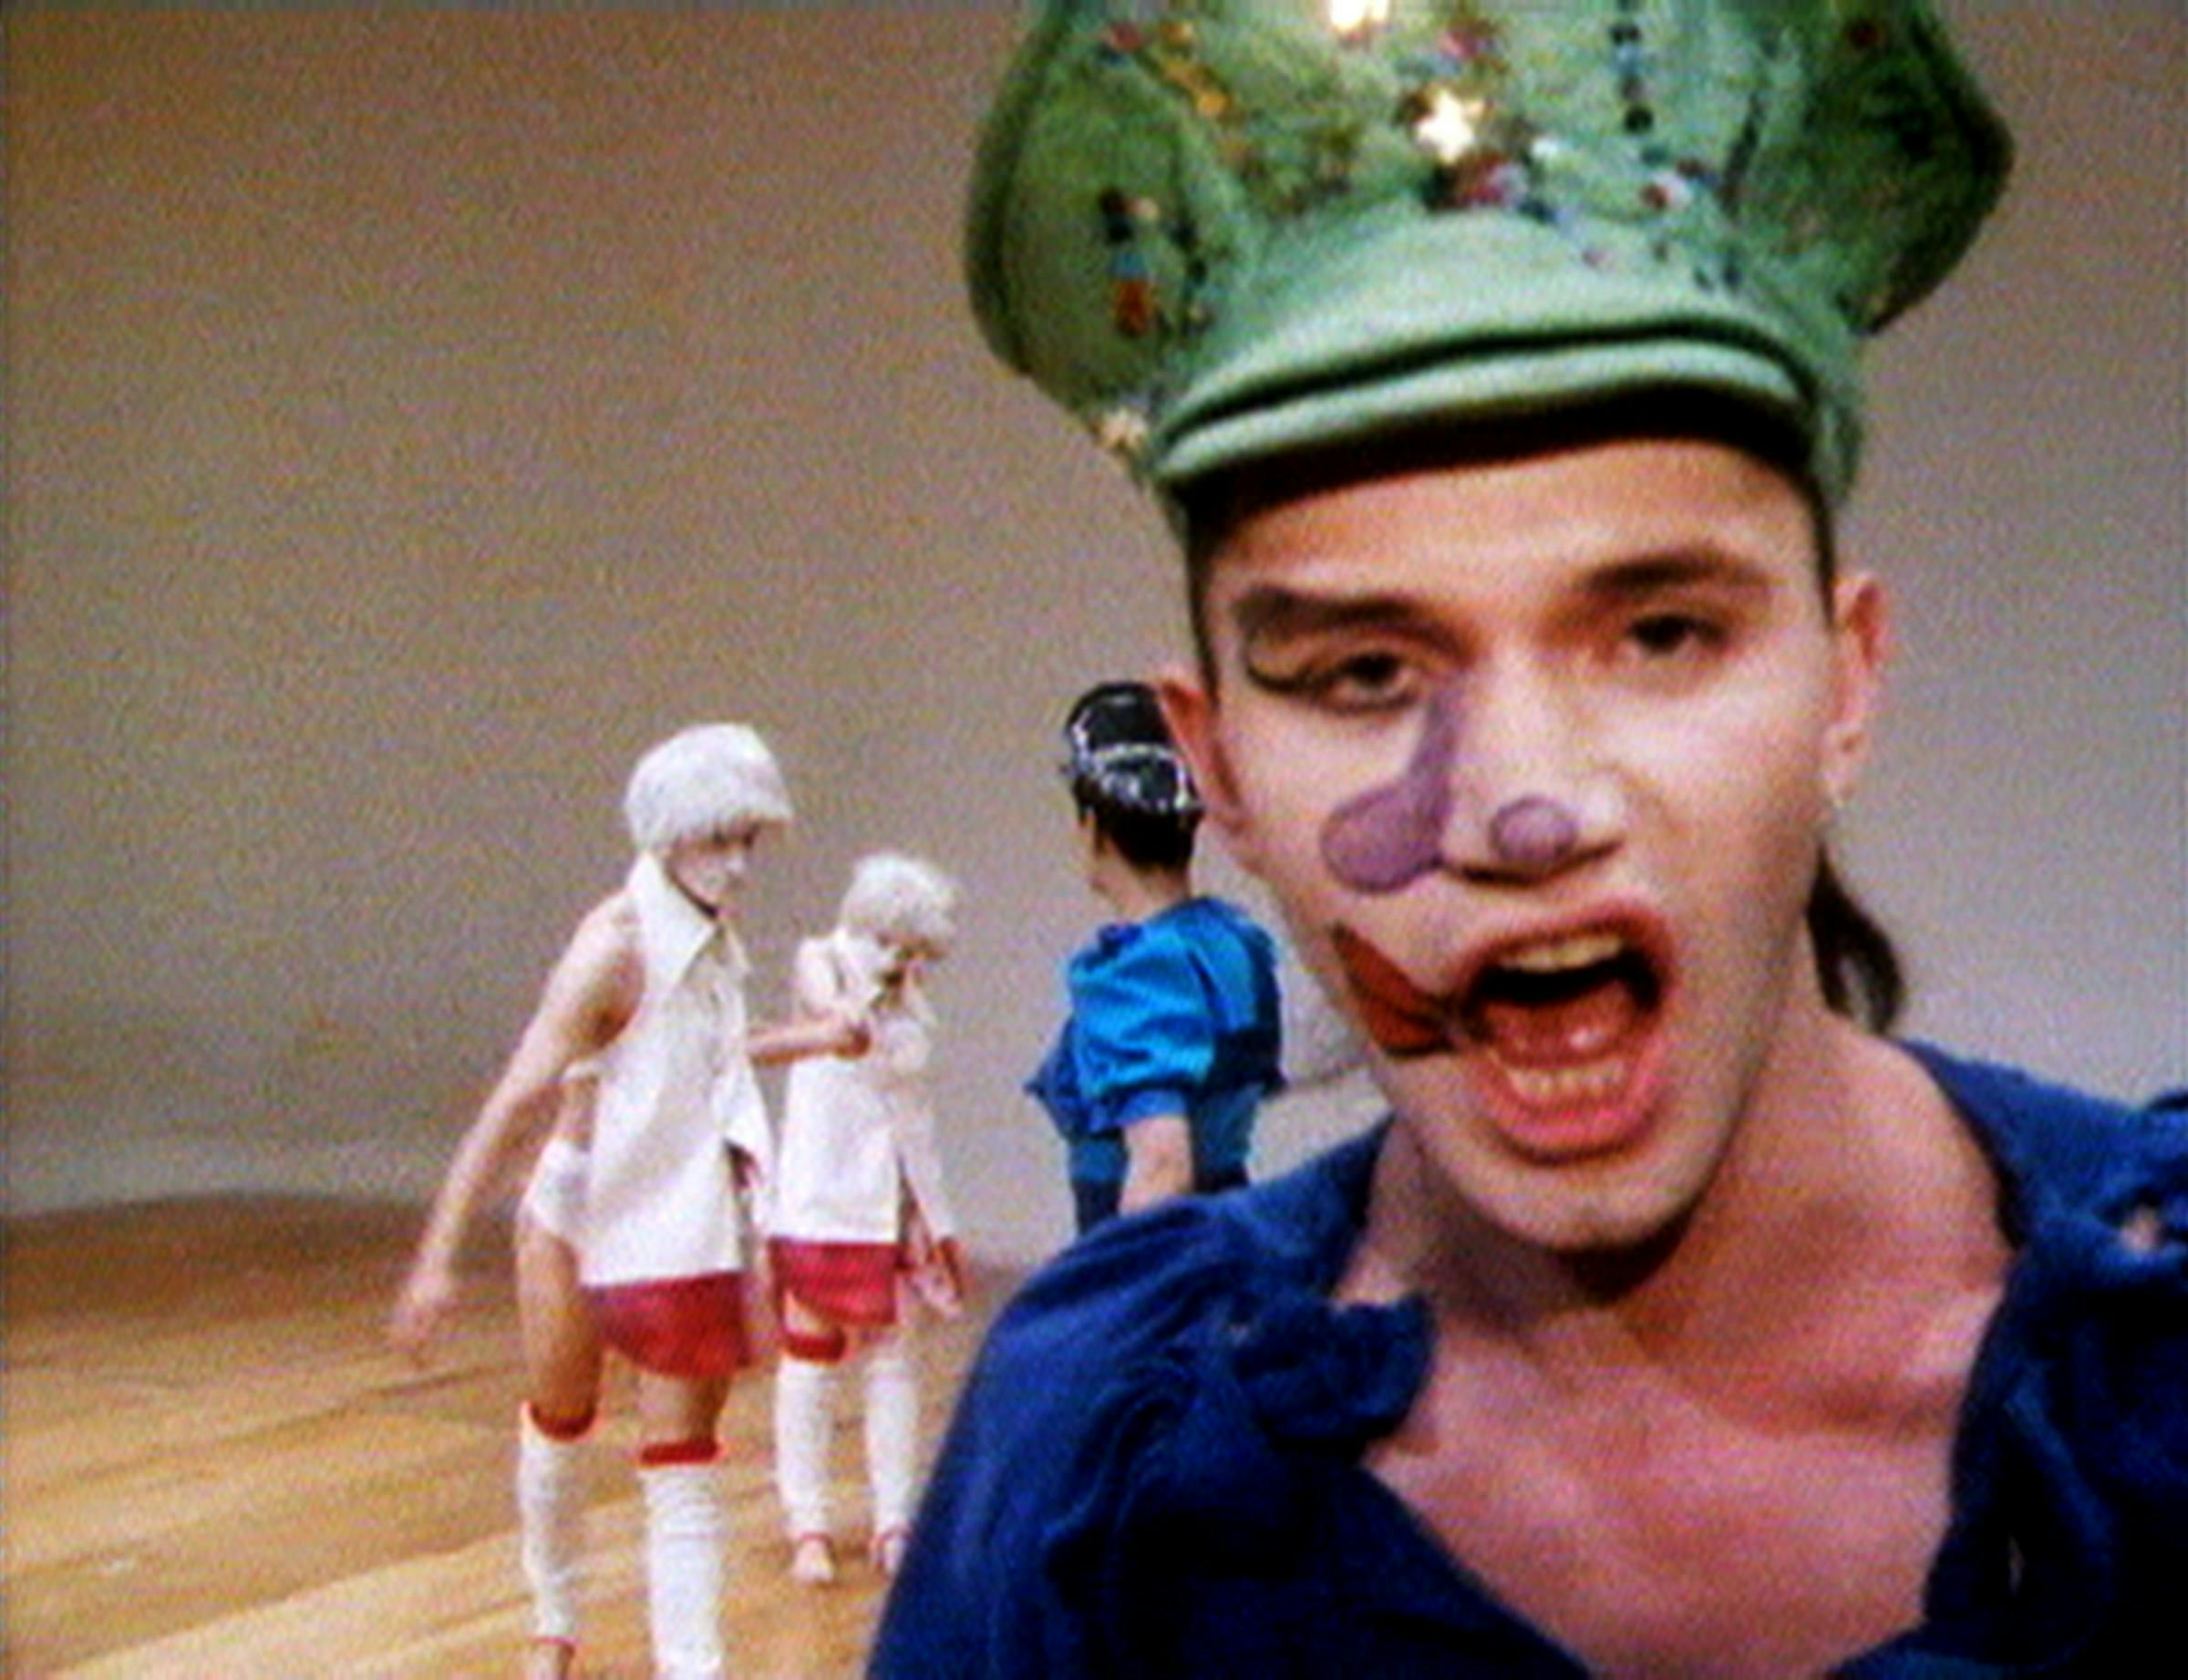 Michael Clark is looking at the camera. He is wearing a green hat and blue top. He is wearing face paint. There are 3 dancers in the background. The floor is wooden.